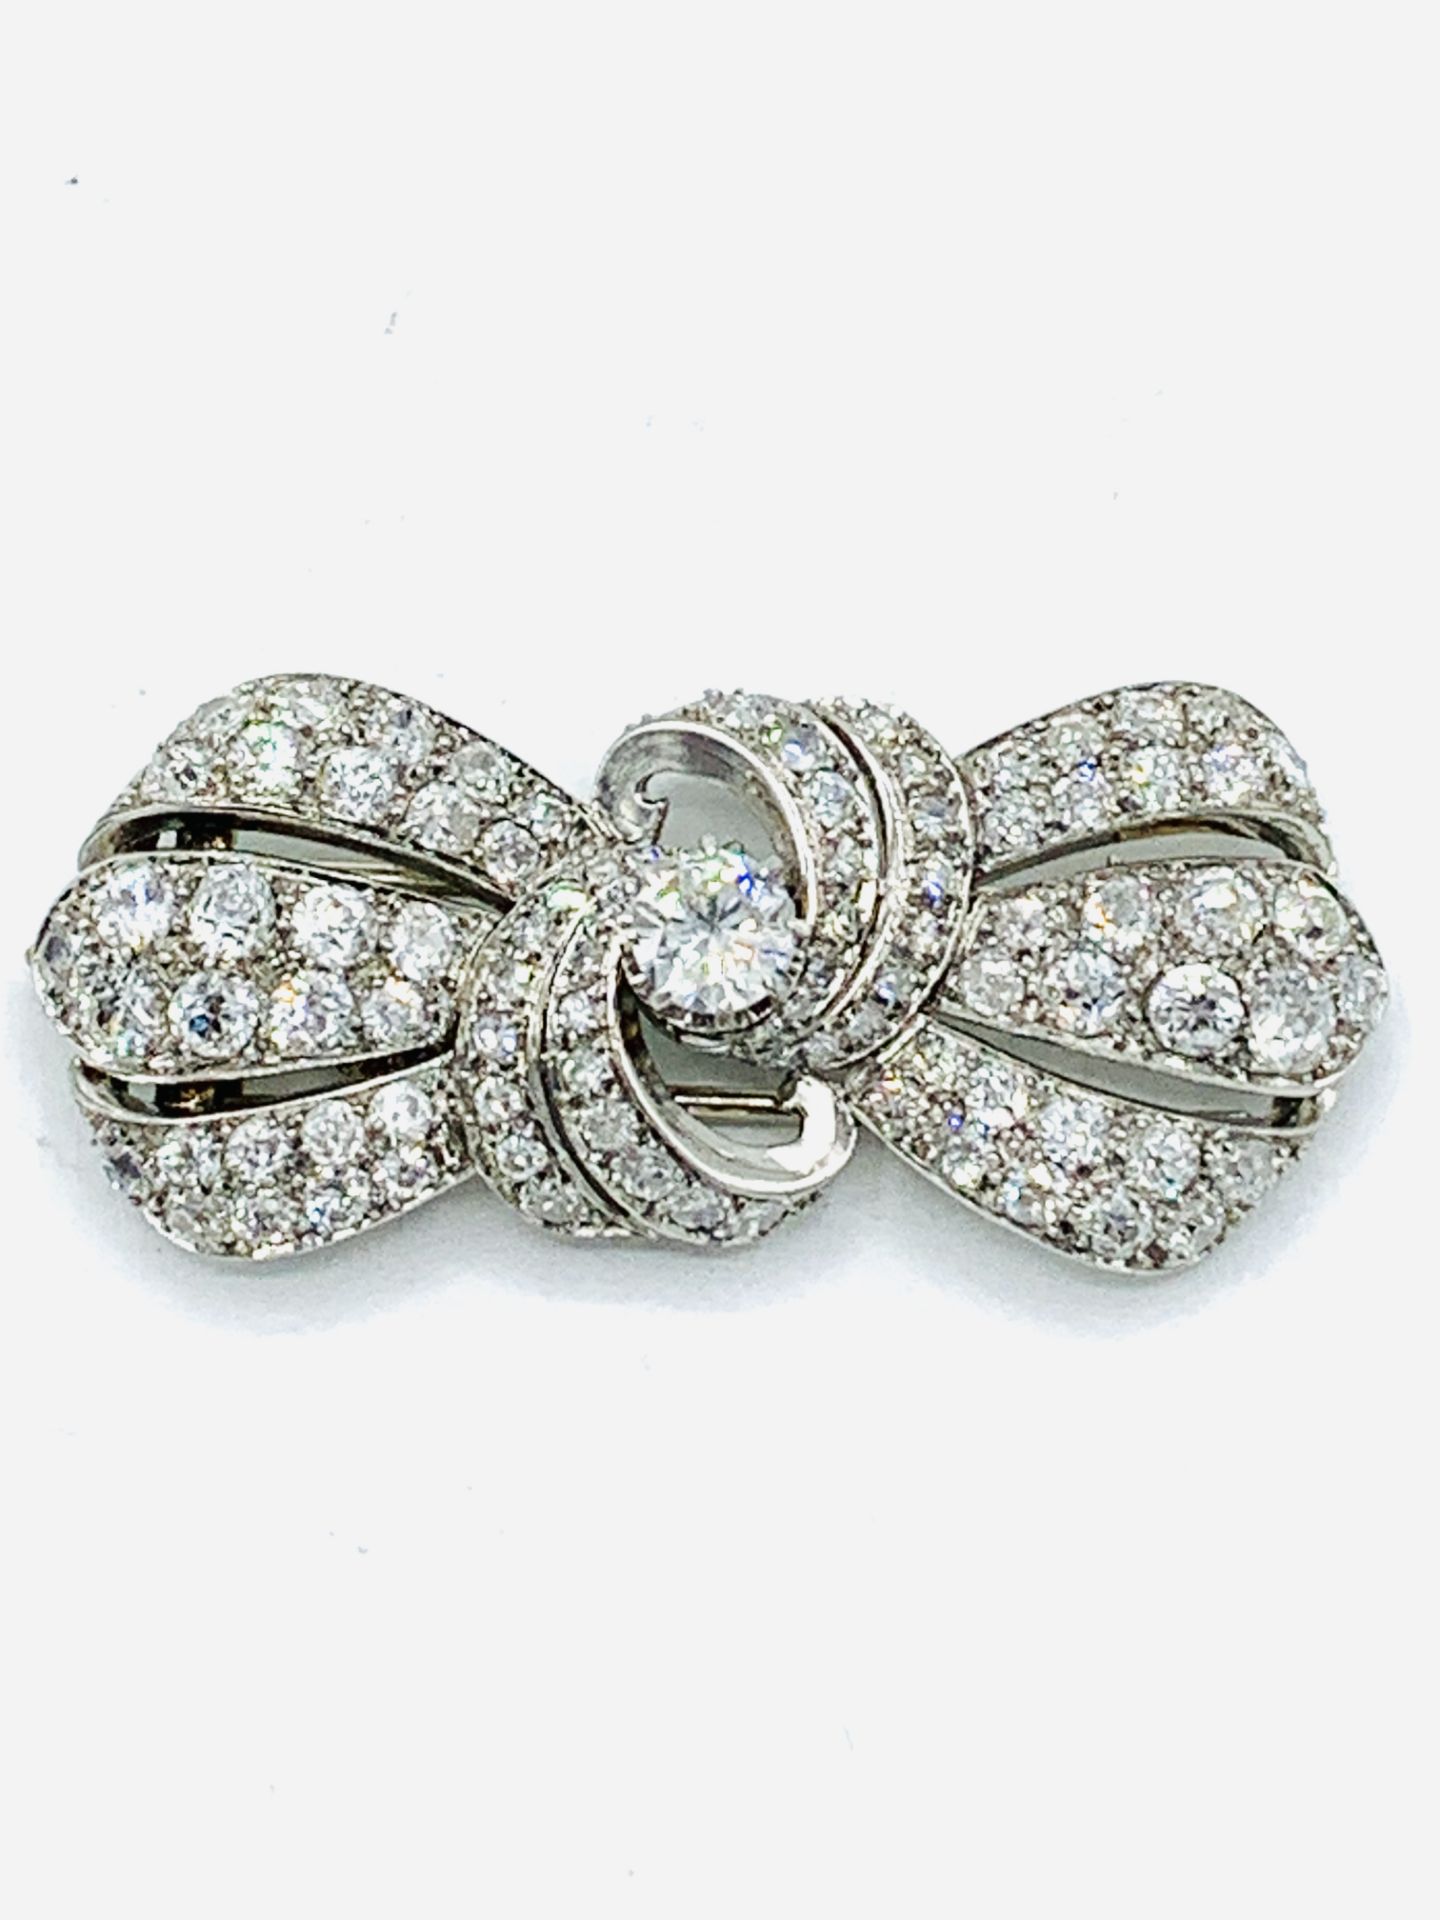 18ct gold and diamond clip brooch, centre stone approximately 1.3ct - Image 2 of 8